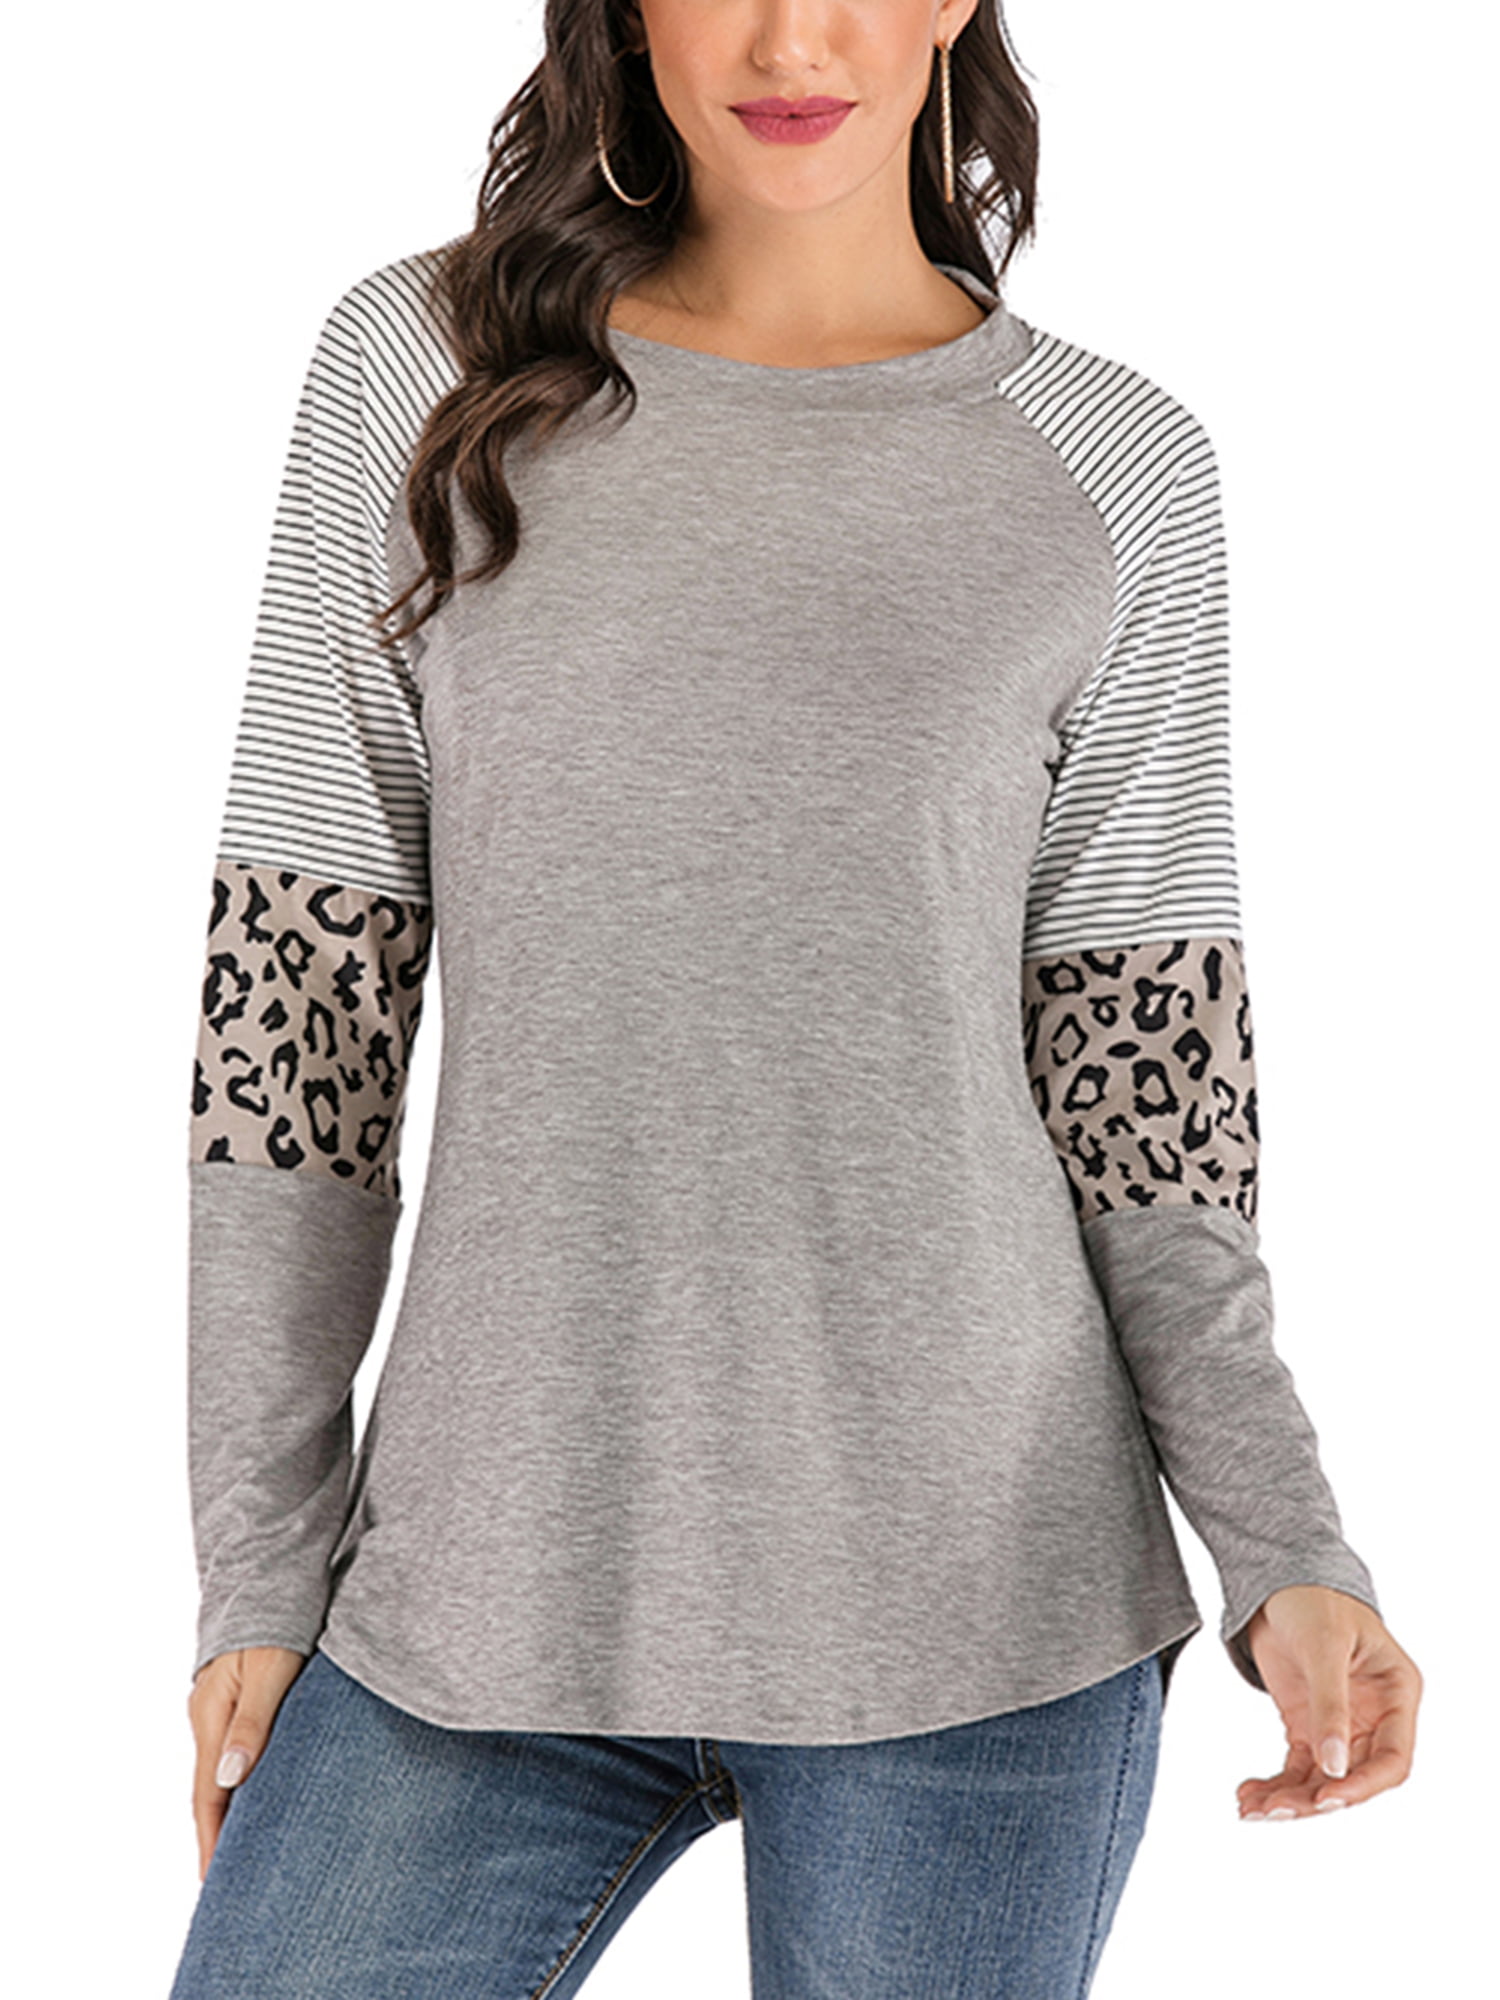 Women Leopard Tunic Shirts with Stripe Long Sleeve Blouse Slim Fit Casual Dress Top Plus Size Clothing